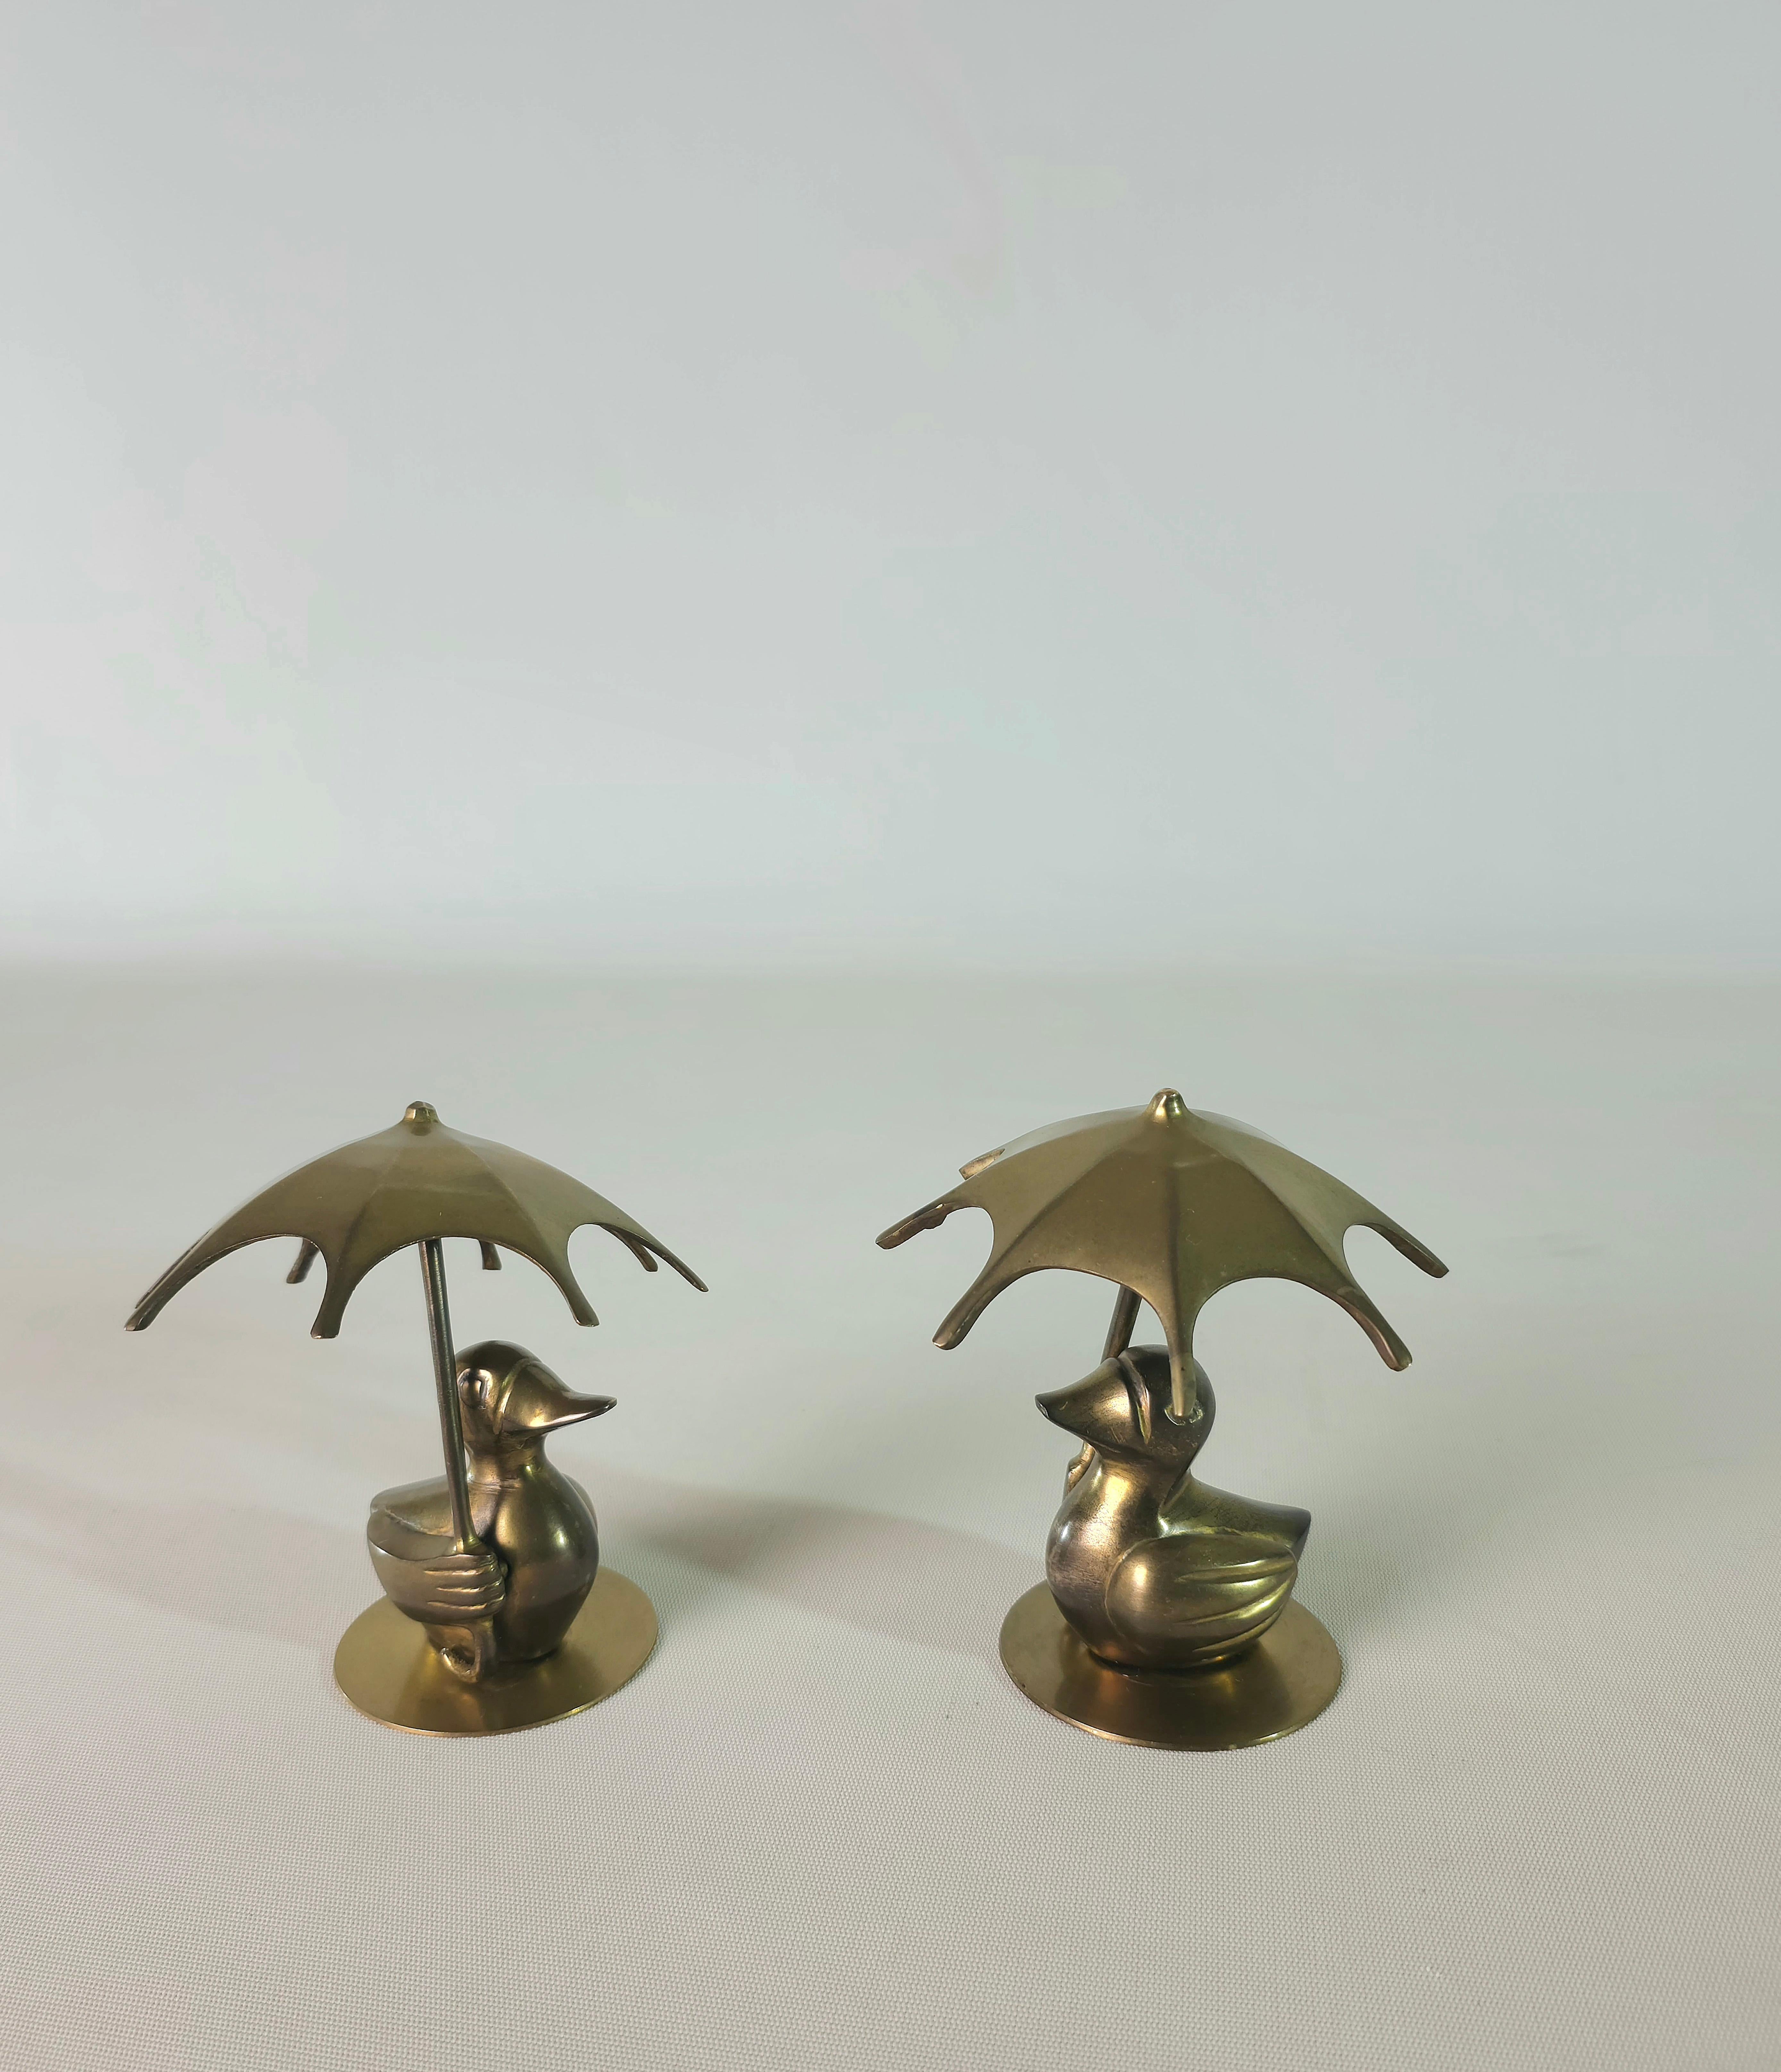 Two Brass Decorative Objects Midcentury Modern Italia 1960/70s For Sale 2